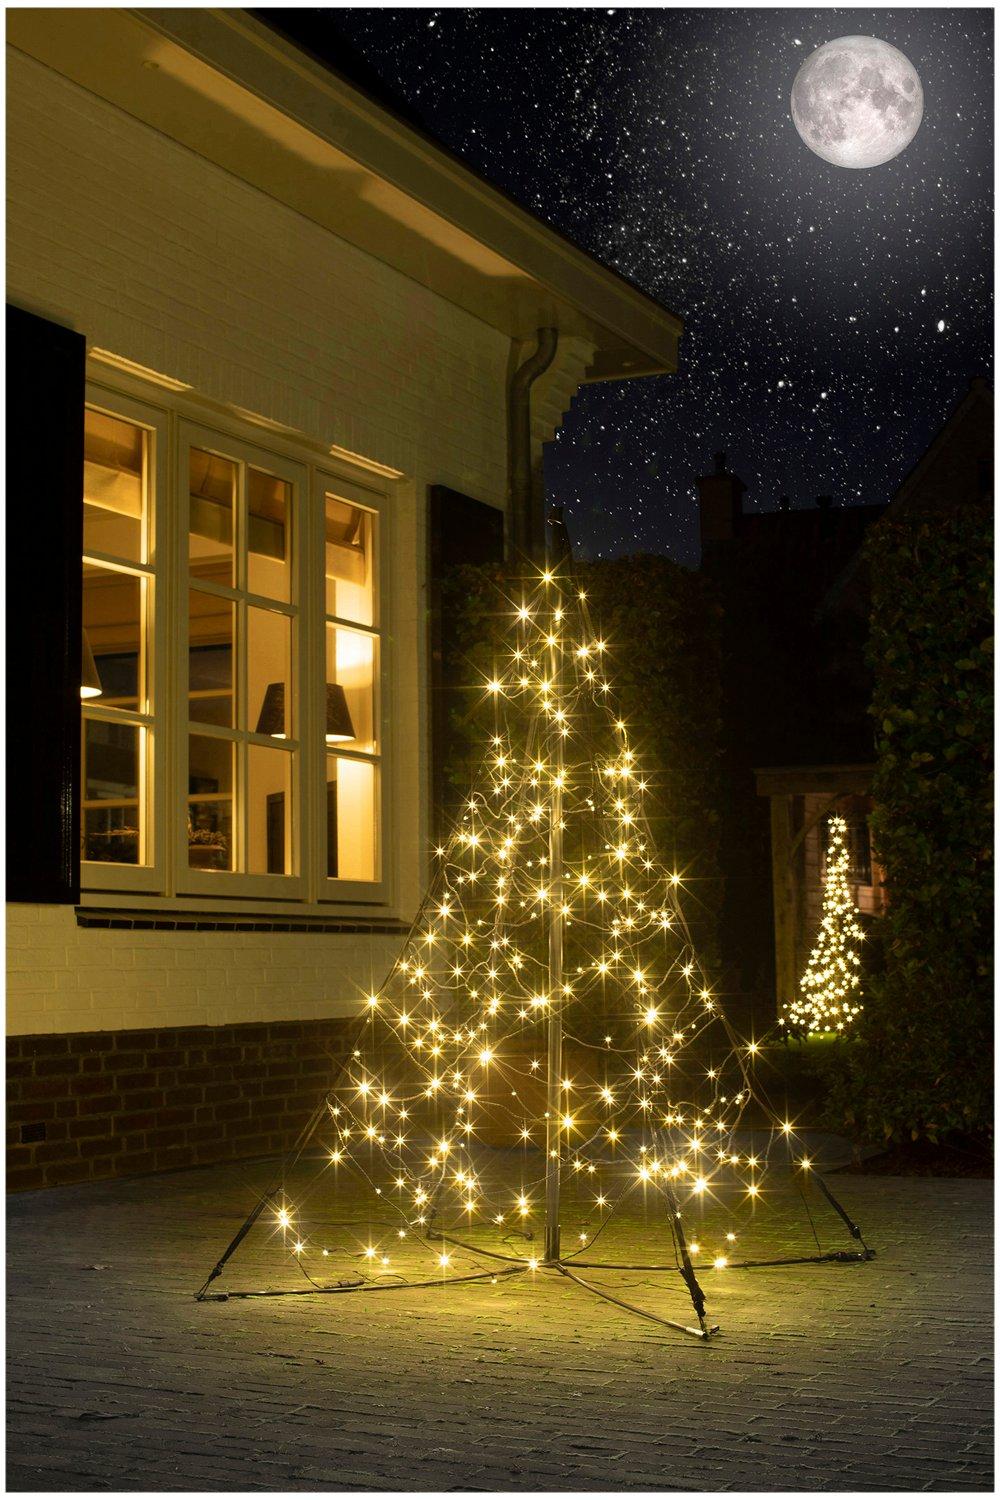 All Surface Outdoor Christmas Tree with Twinkling Lights - 1.5M 240 LED lights create a beautifully 